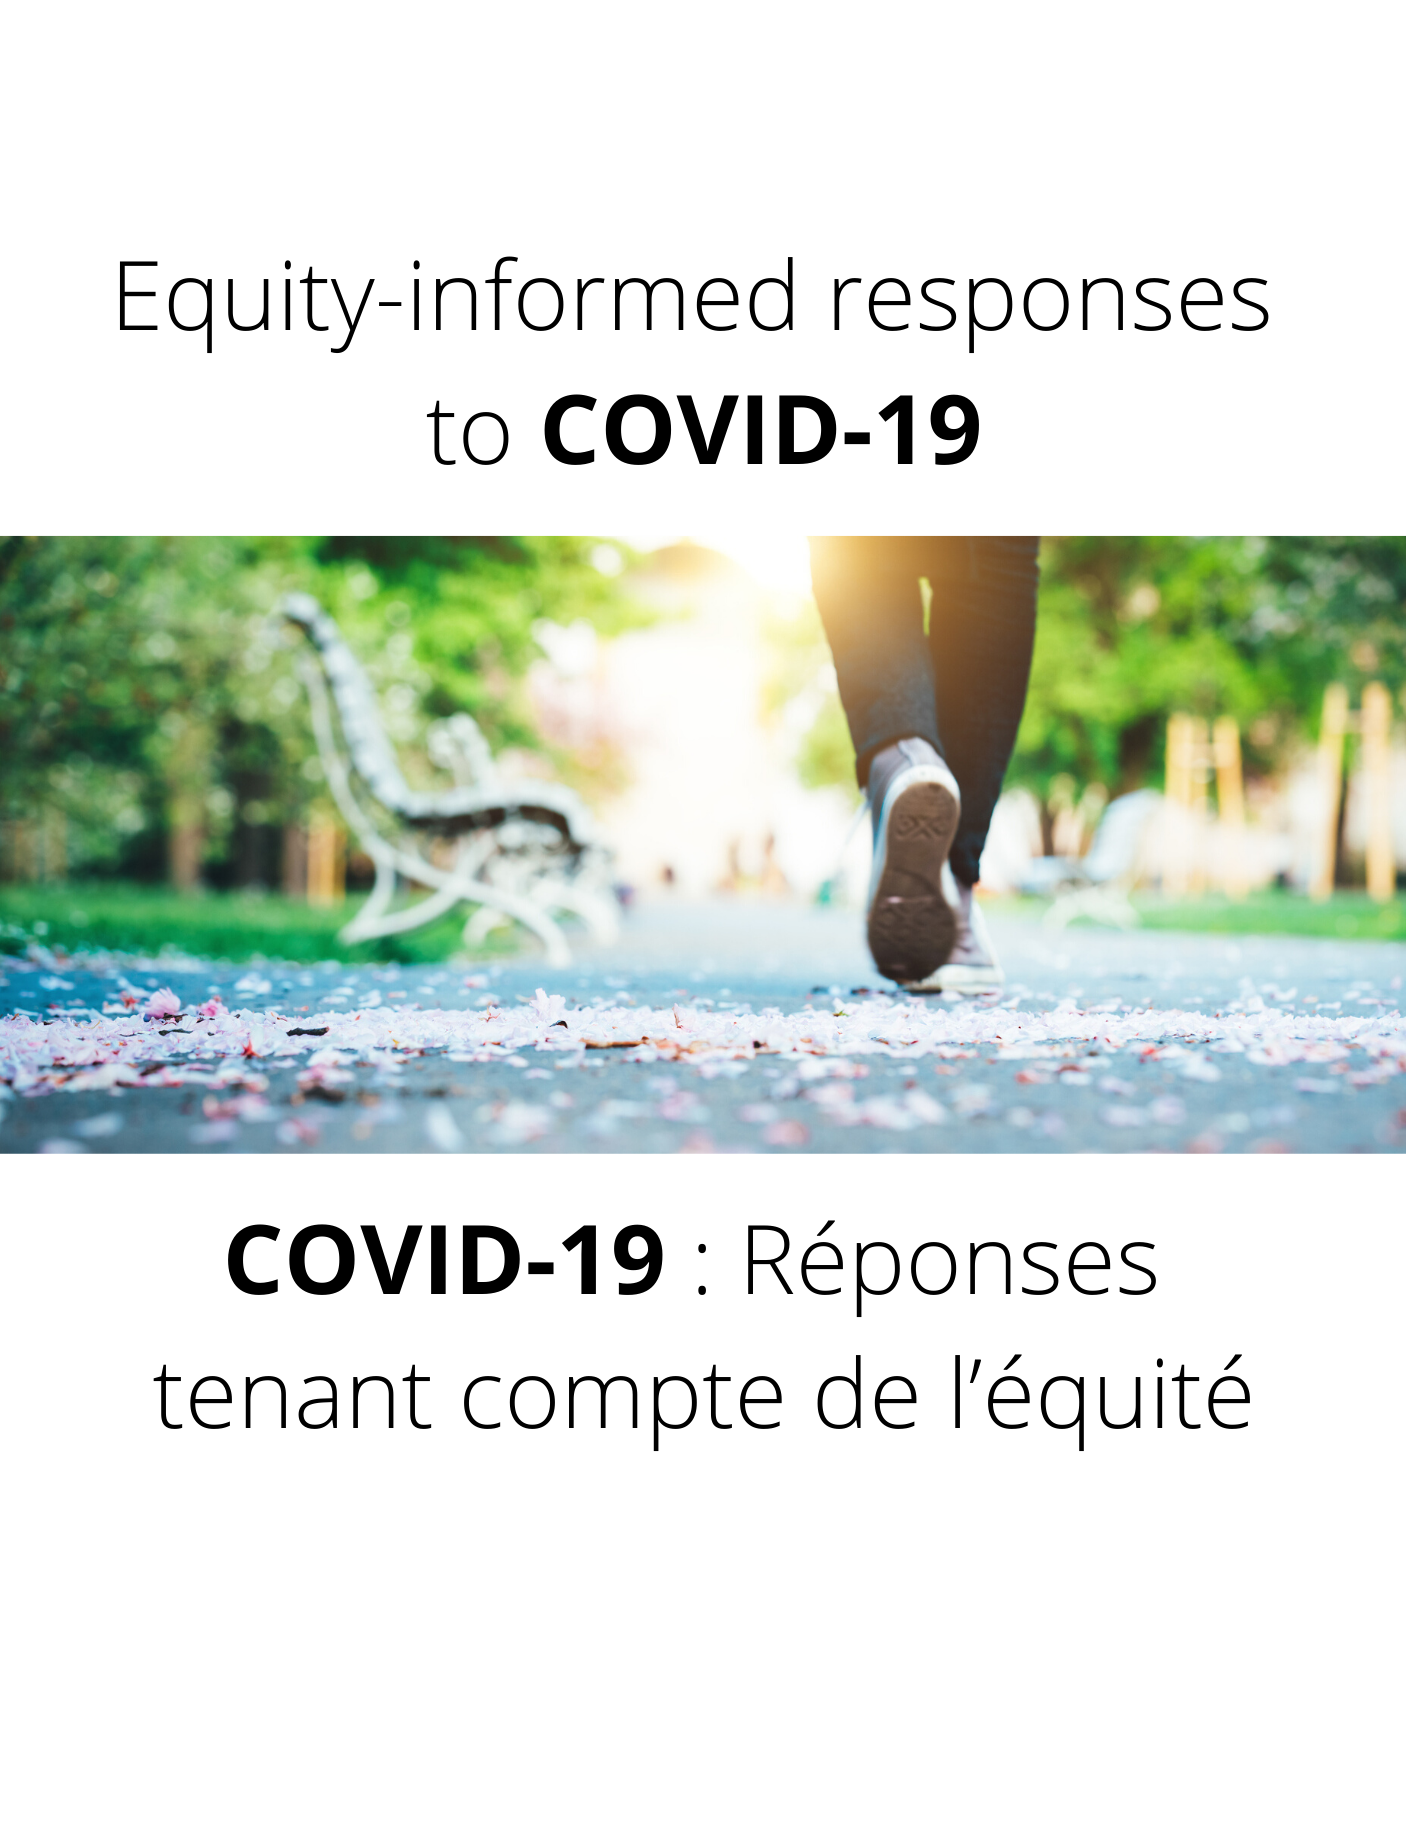 Community engagement for COVID-19 prevention and control: A rapid evidence synthesis